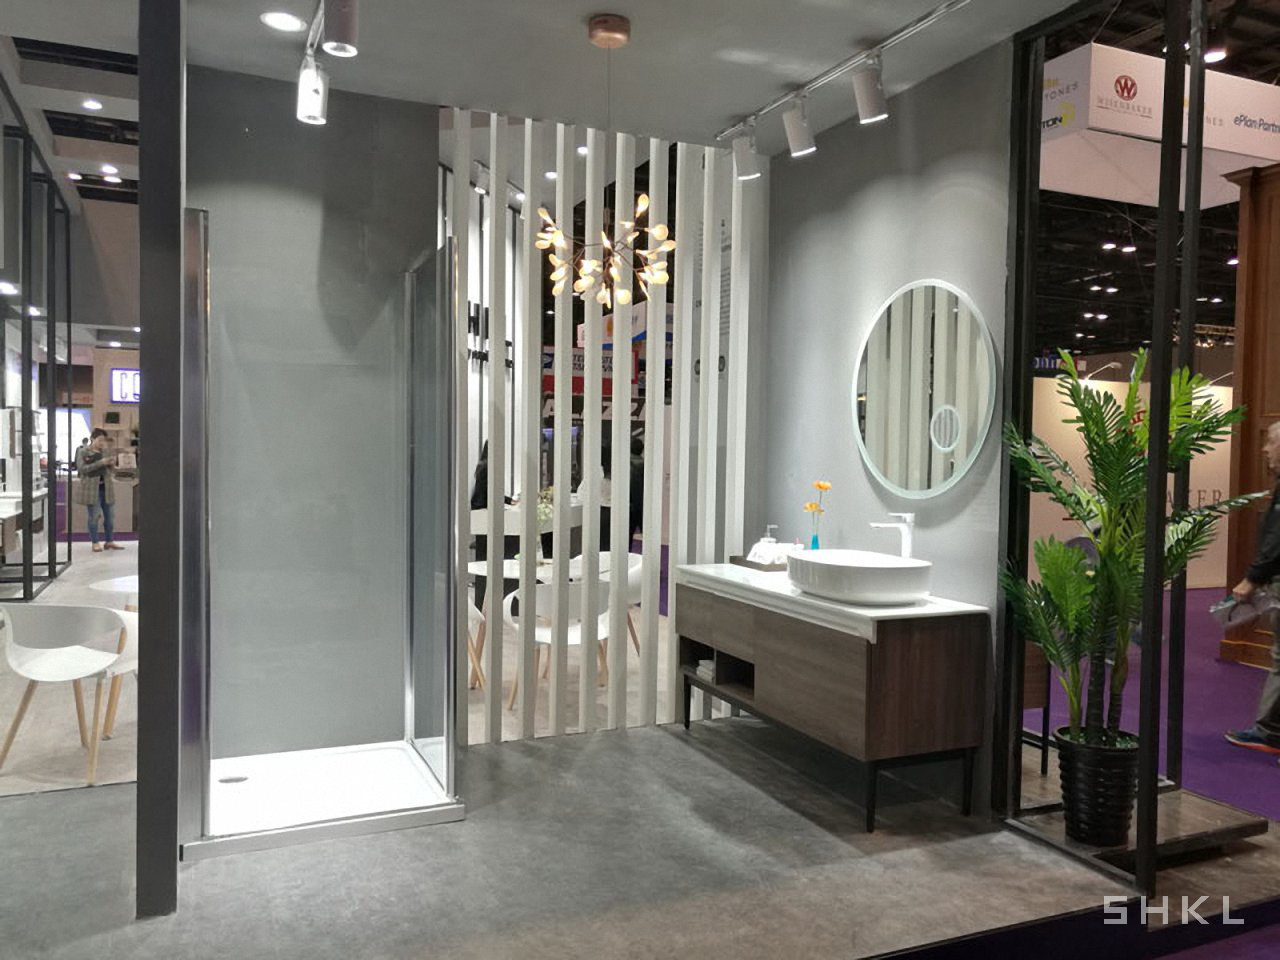 KBIS 2018, SHKL attended KBIS the 2nd time, leading the trend of bathroom vanities 6